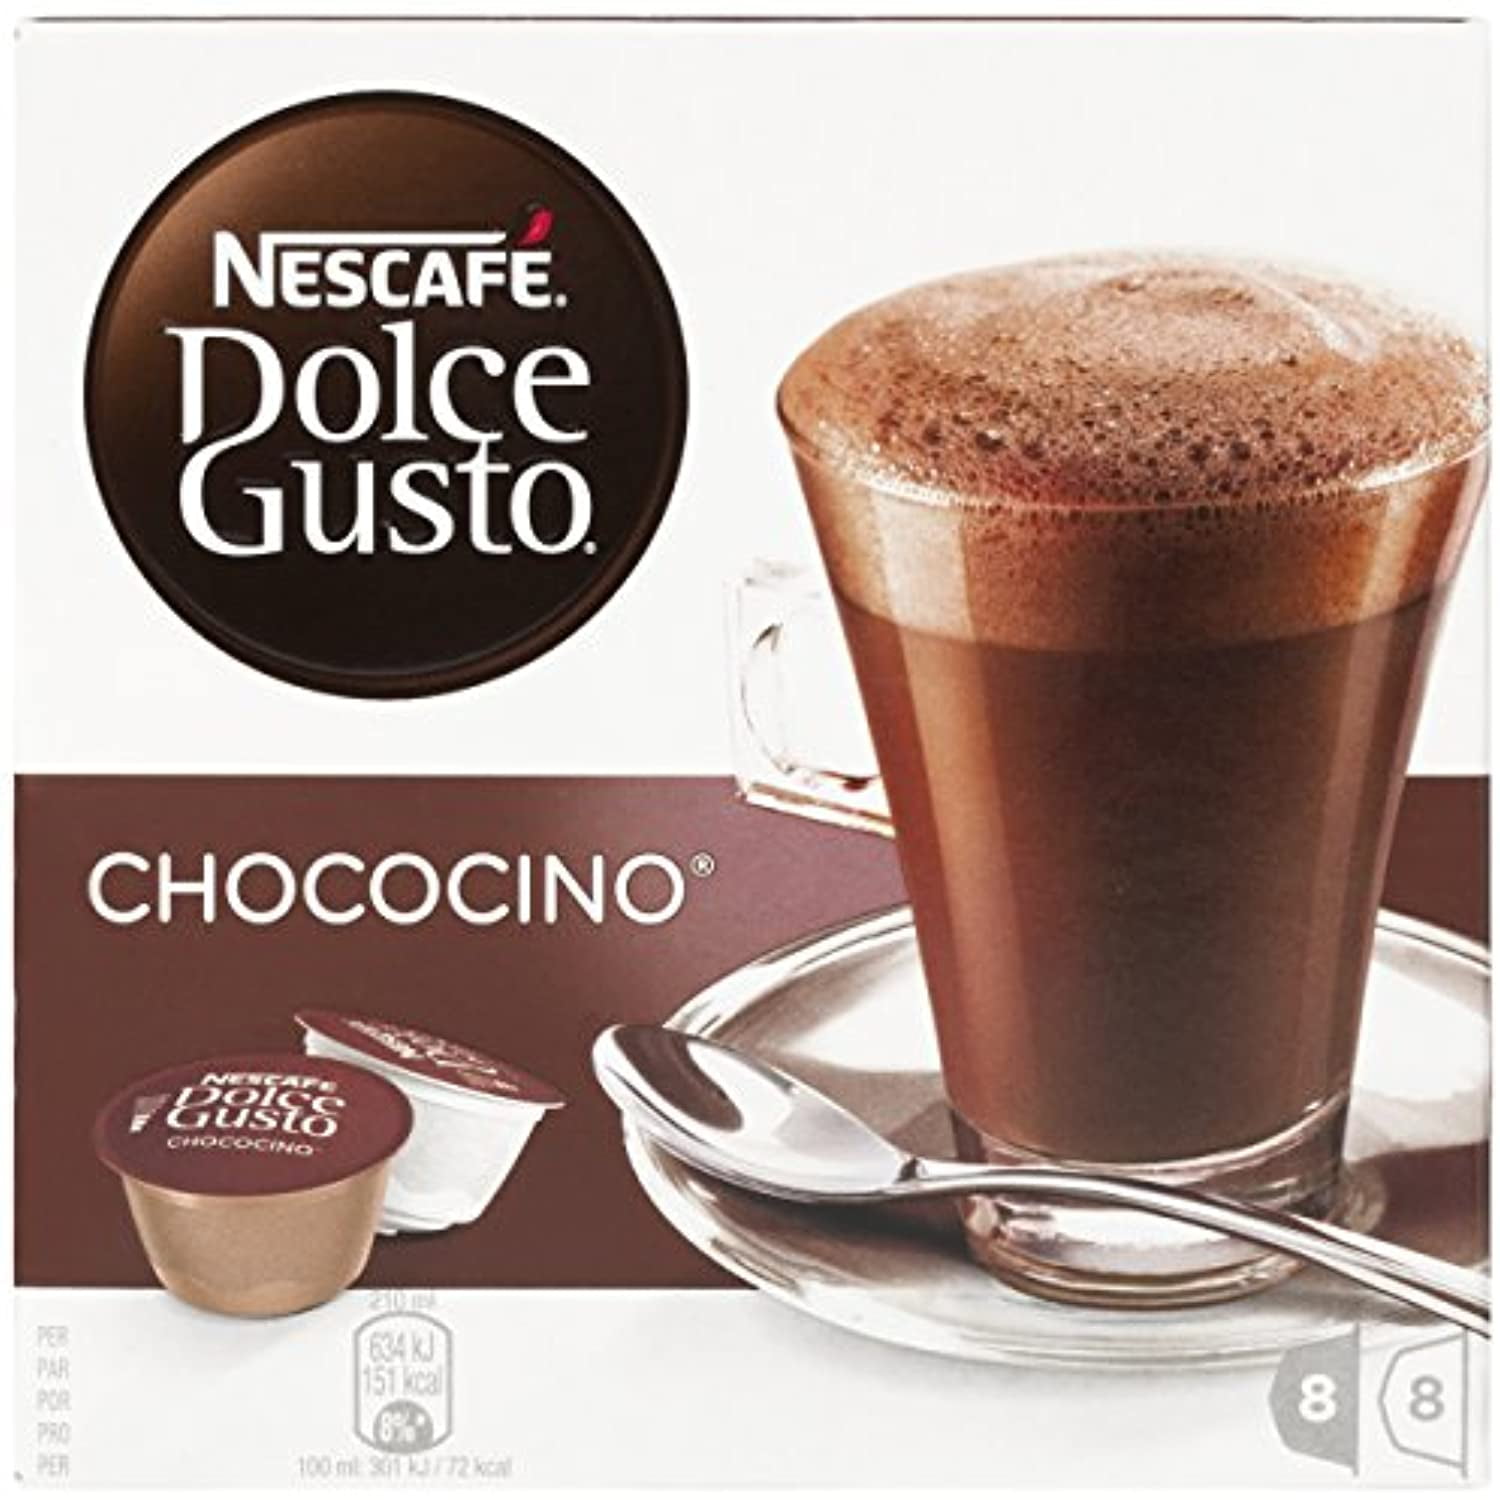 Nescafé Dolce Gusto Chococino 16 Capsules (Pack Of 3, Total 48 Capsules) 